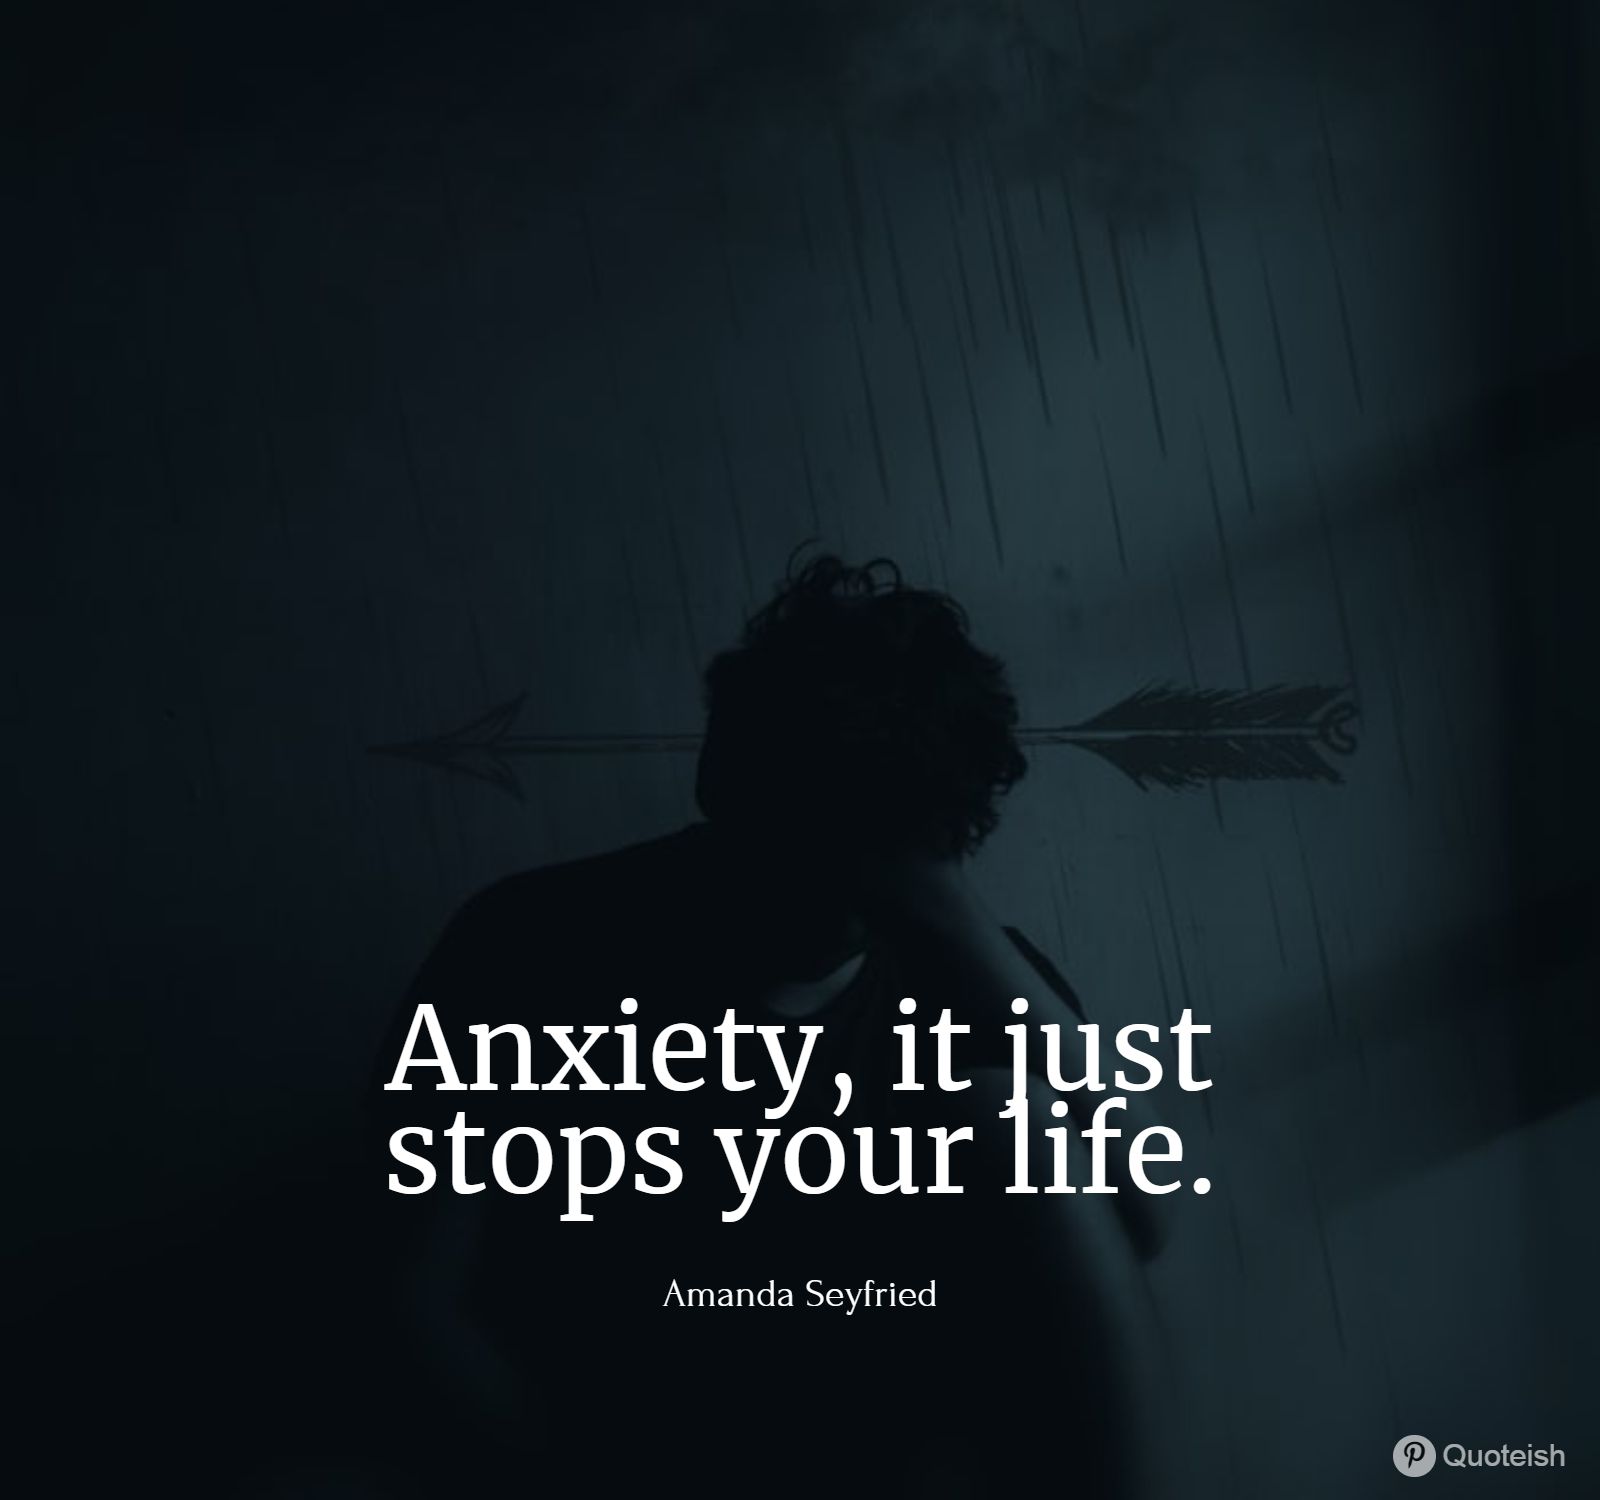 33+ Anxiety Quotes - QUOTEISH